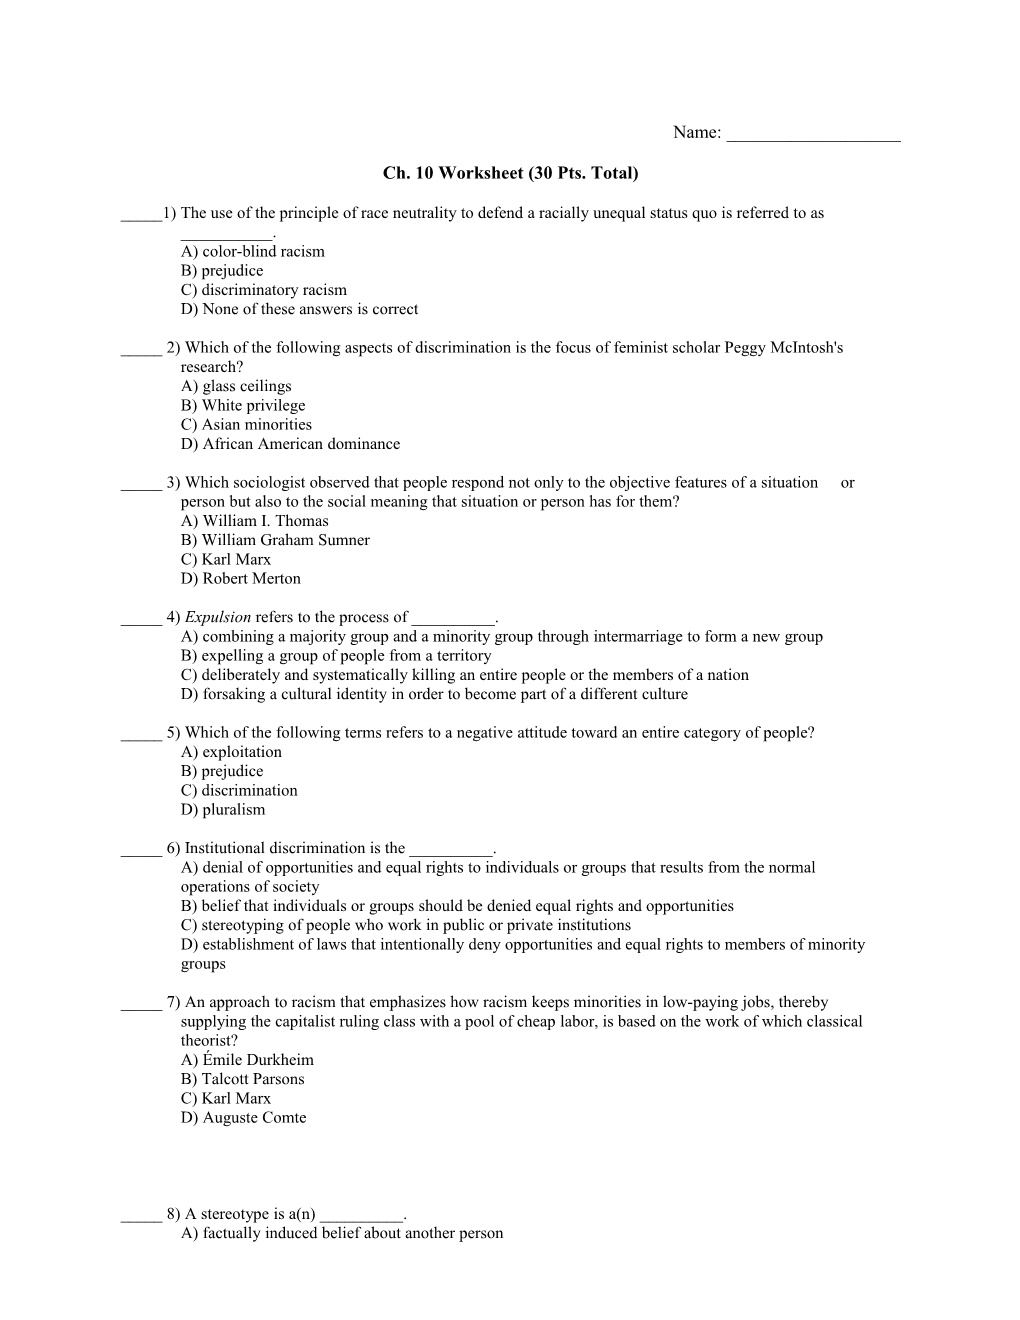 Ch. 10Worksheet (30 Pts. Total)